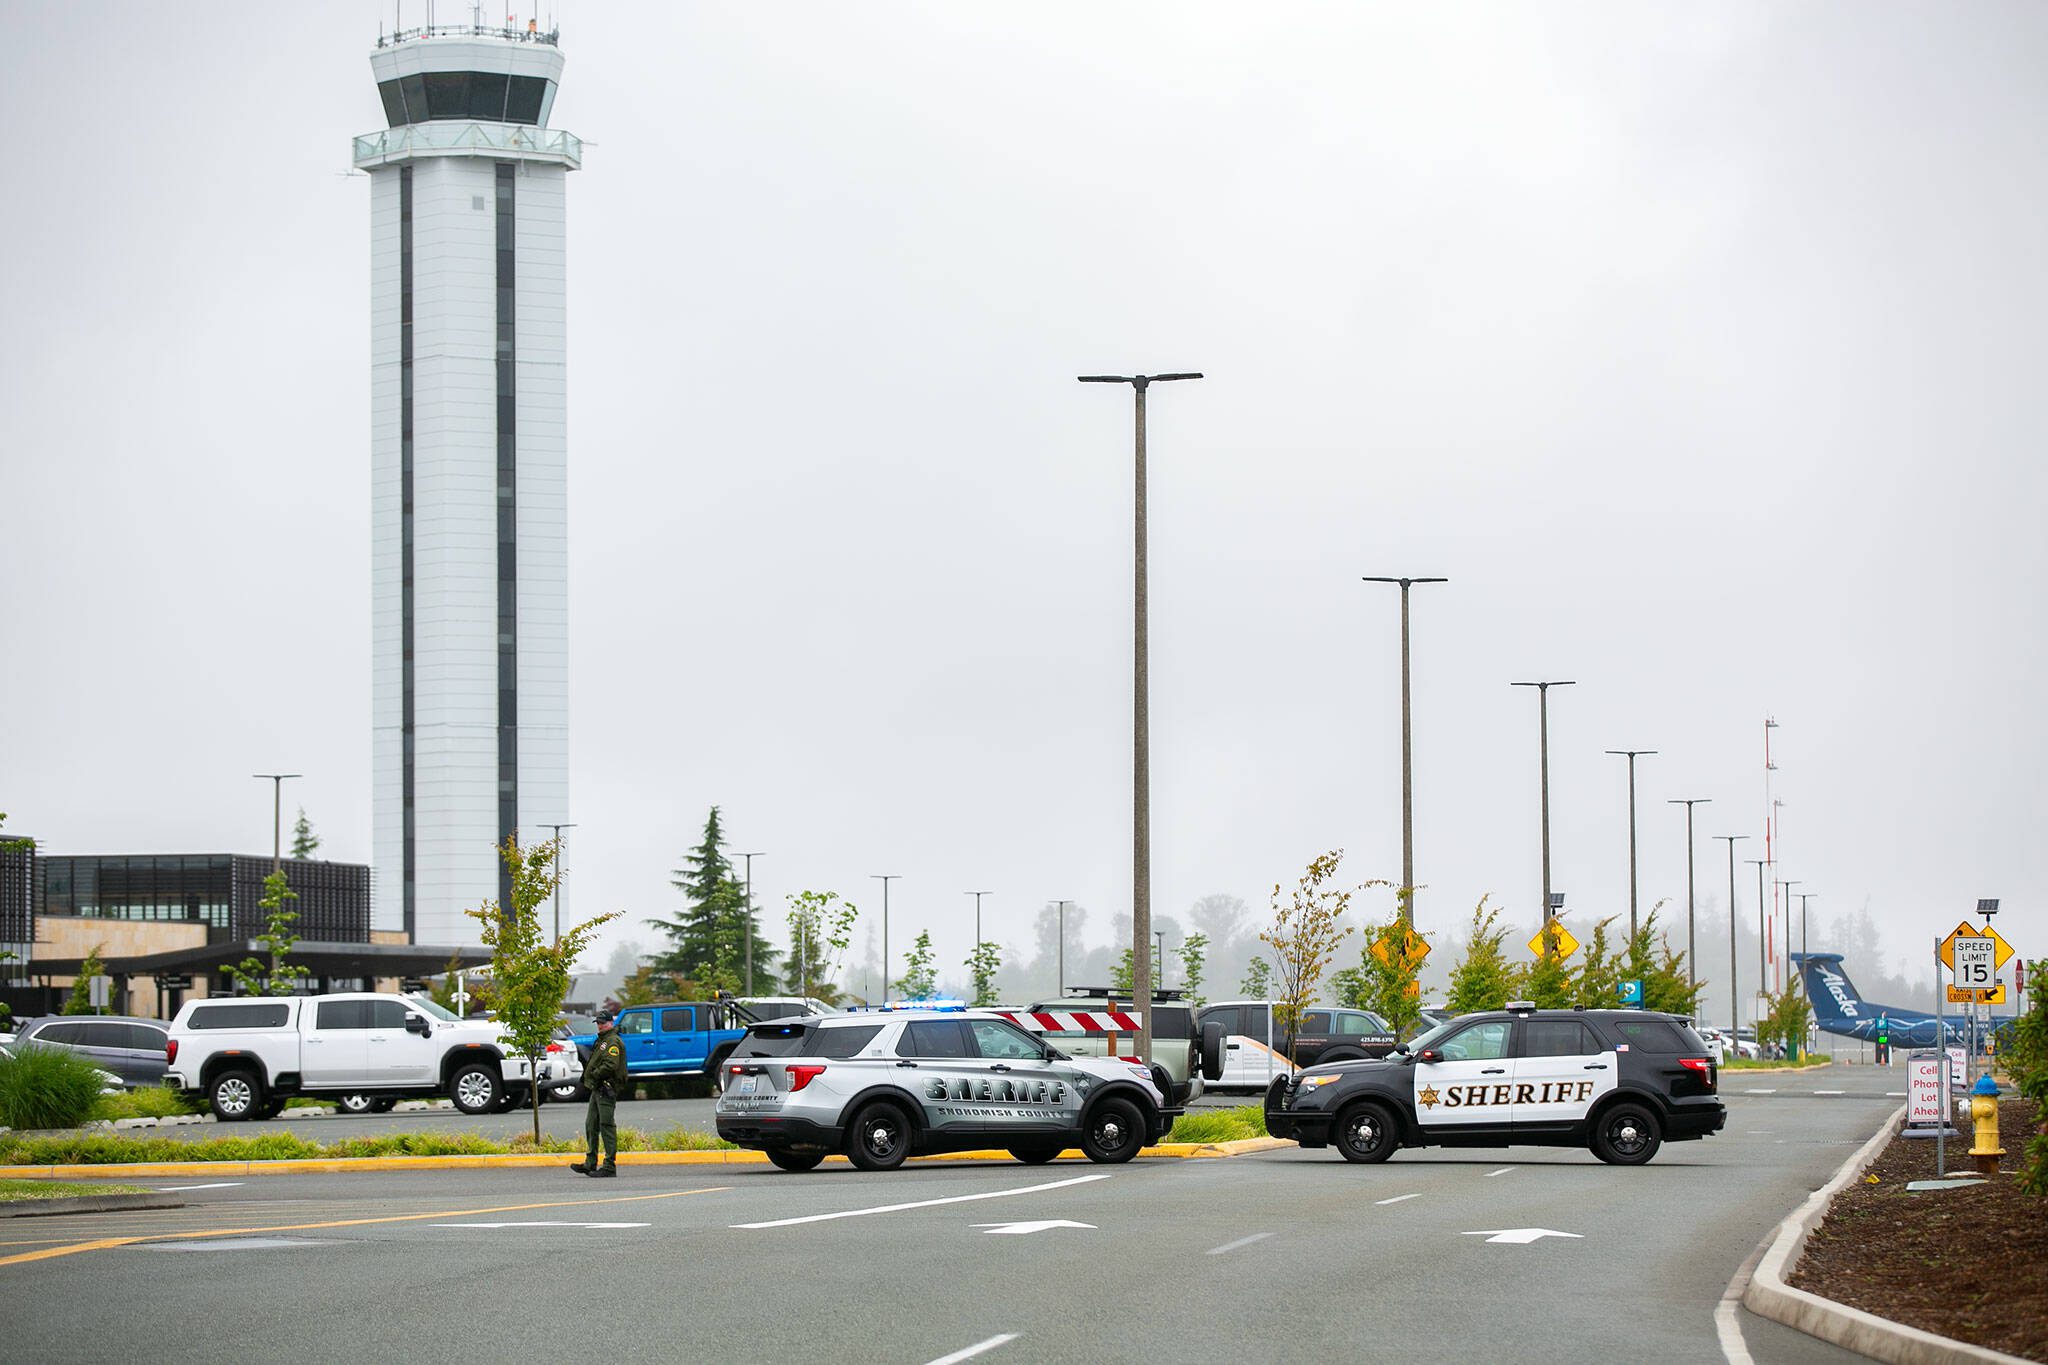 Snohomish County Sheriff vehicles block off access to Paine Field after the discovery of a suspicious package at the airport on Tuesday, June 13, 2023, in Everett, Washington. (Ryan Berry / The Herald)